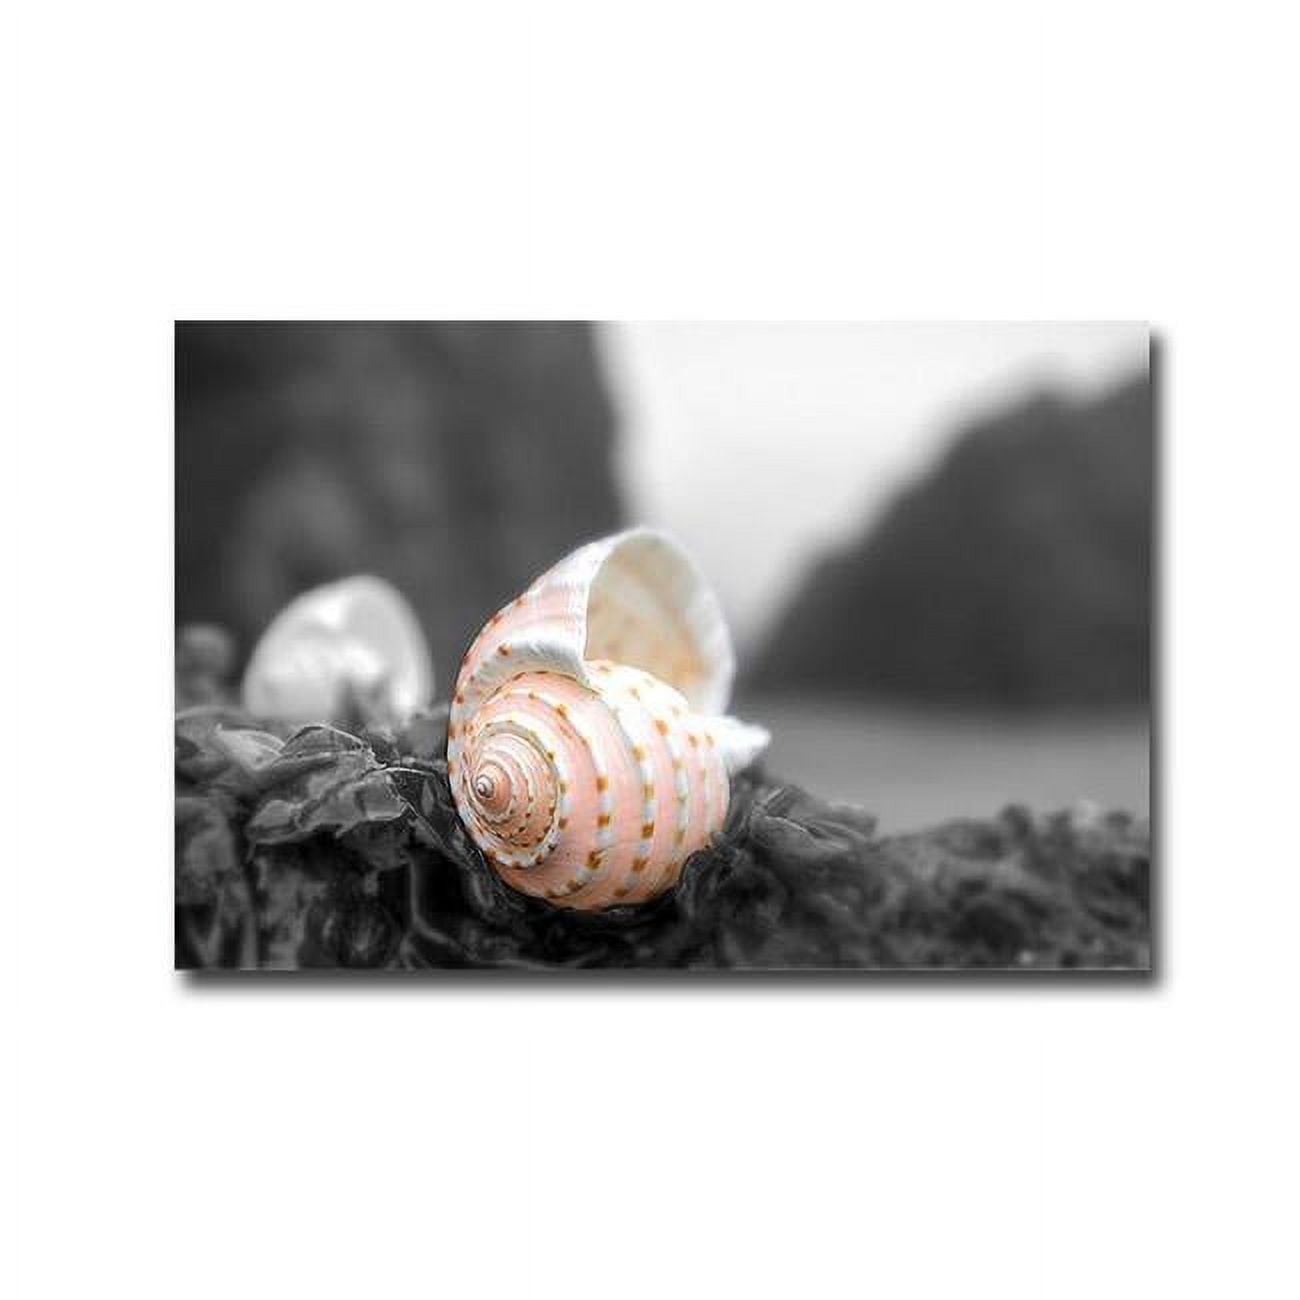 Picture of Artistic Home Gallery 1218E868IG Crescent Beach Shells No.1A by Alan Blaustein Premium Gallery-Wrapped Canvas Giclee Art - 12 x 18 x 1.5 in.